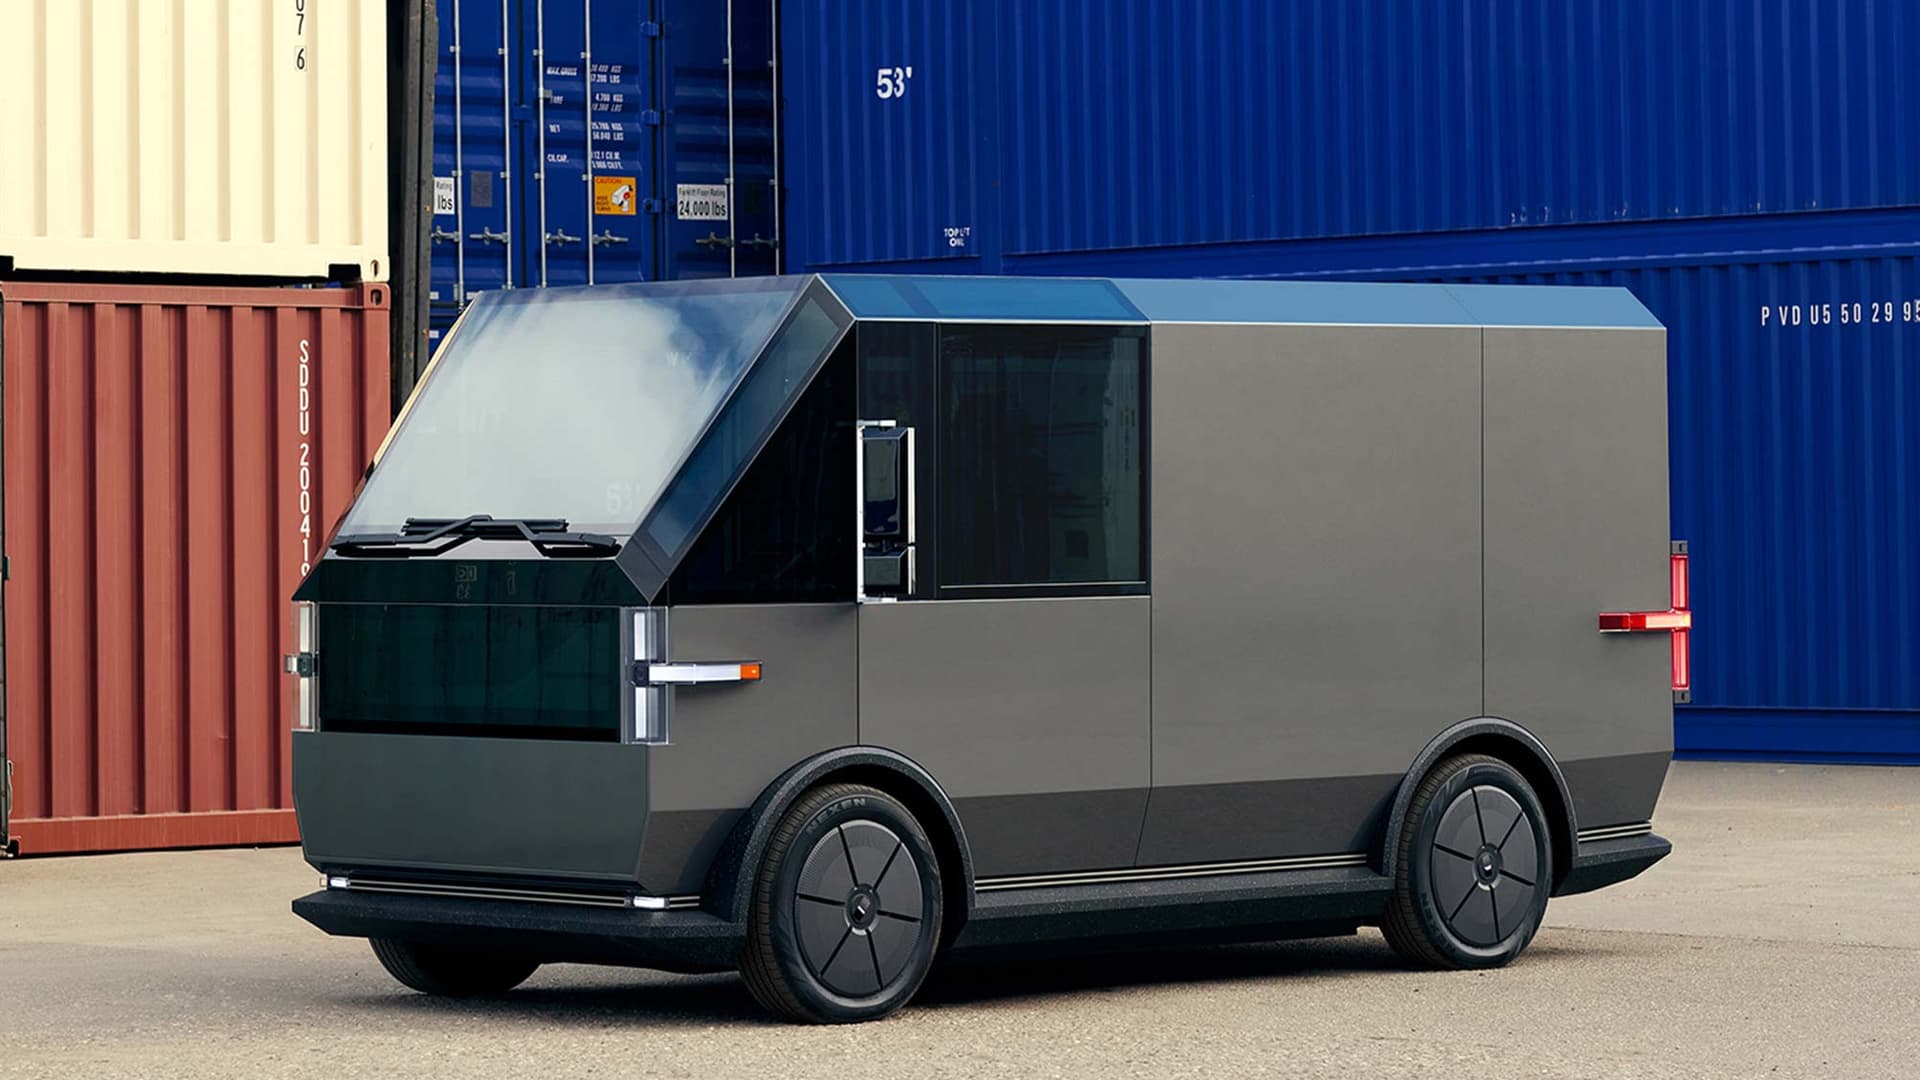 Canoo's van – known as a multipurpose delivery vehicle, or MPDV, because of the ways it can be upfitted – is designed for commercial customers.